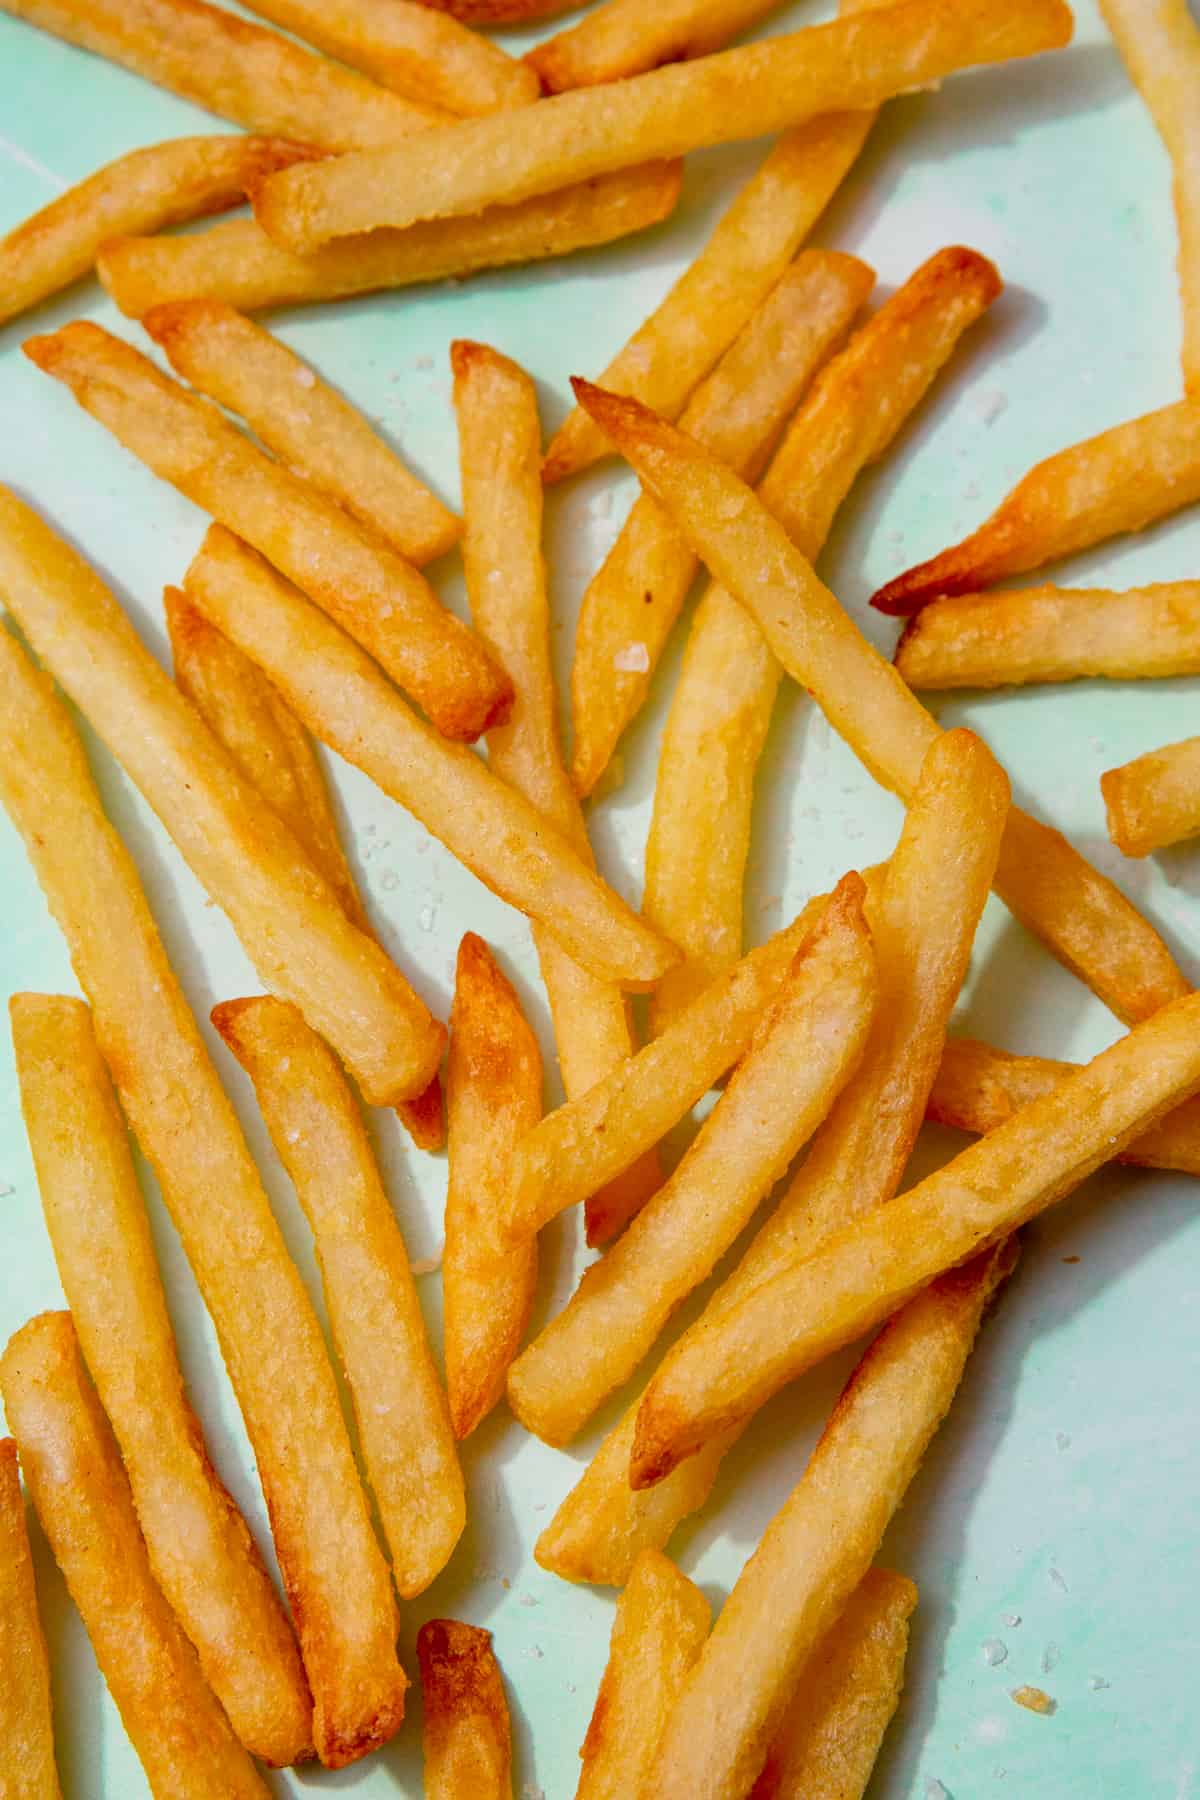 Golden browned Frence fries scattered over a pale blue background.